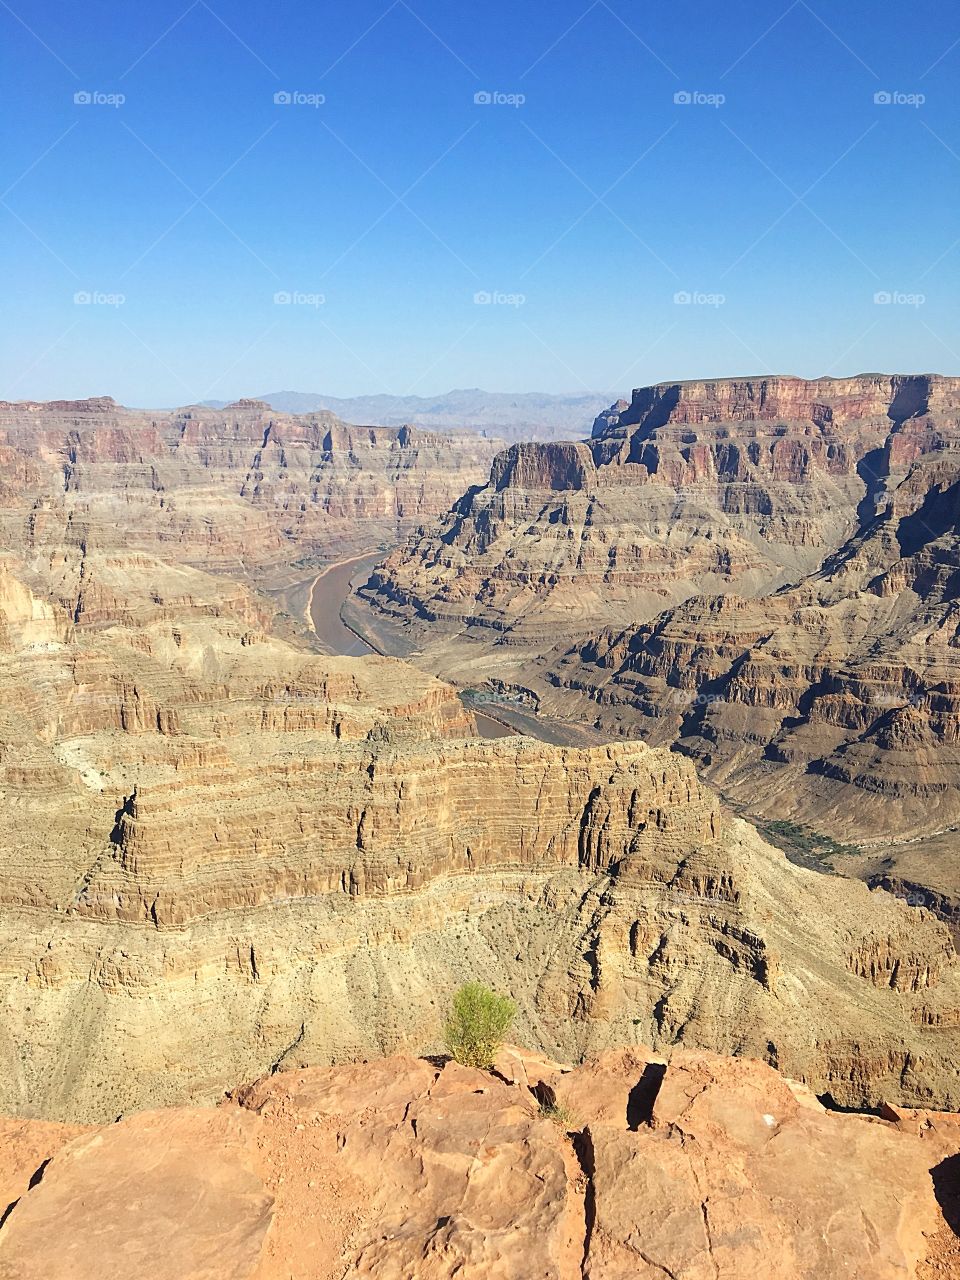 Great Canyon is one of the amazing places on earth.